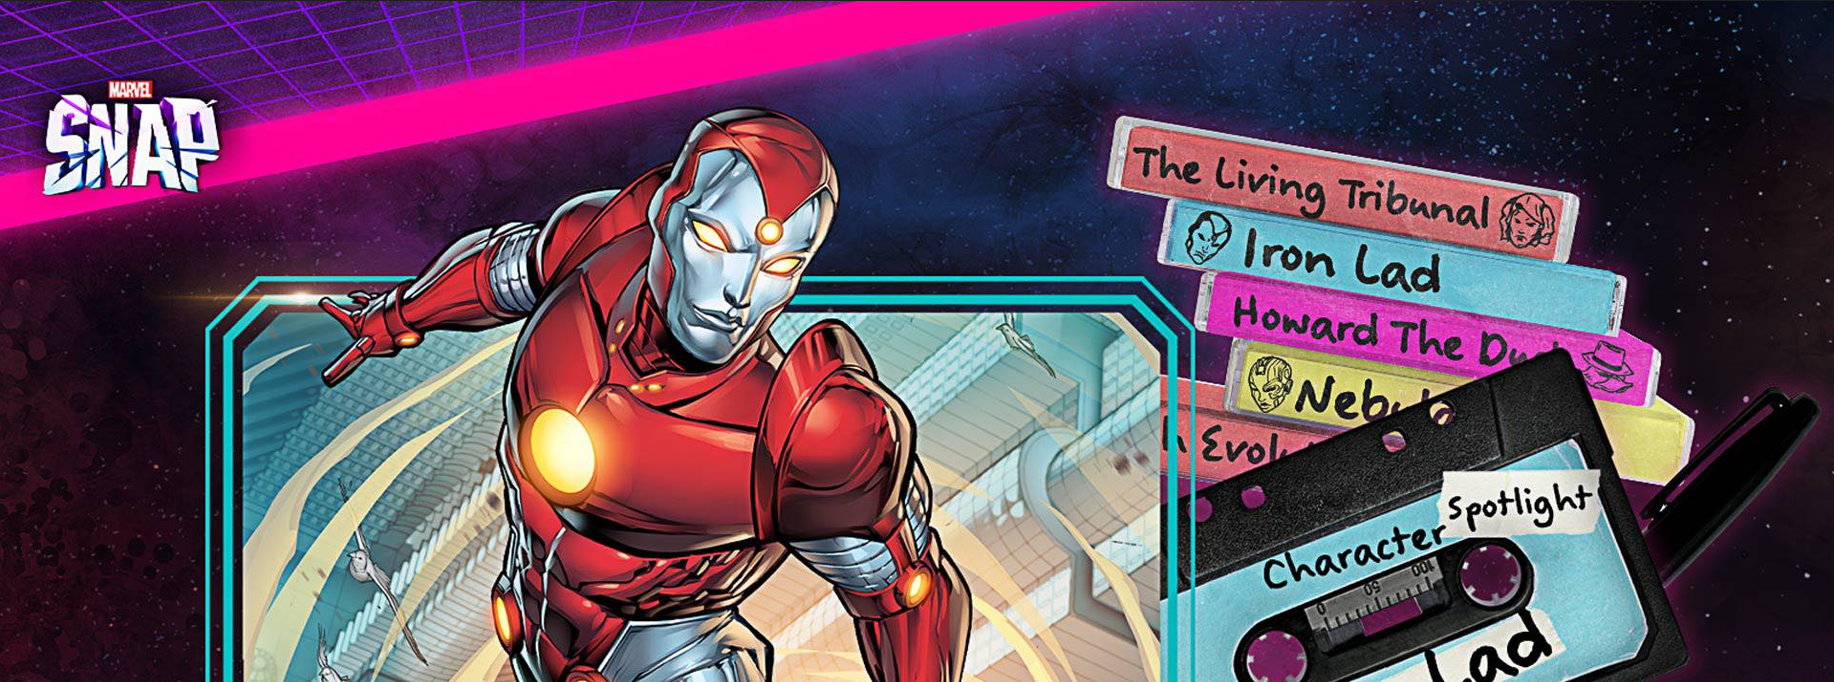 Marvel Snap Iron Lad Features